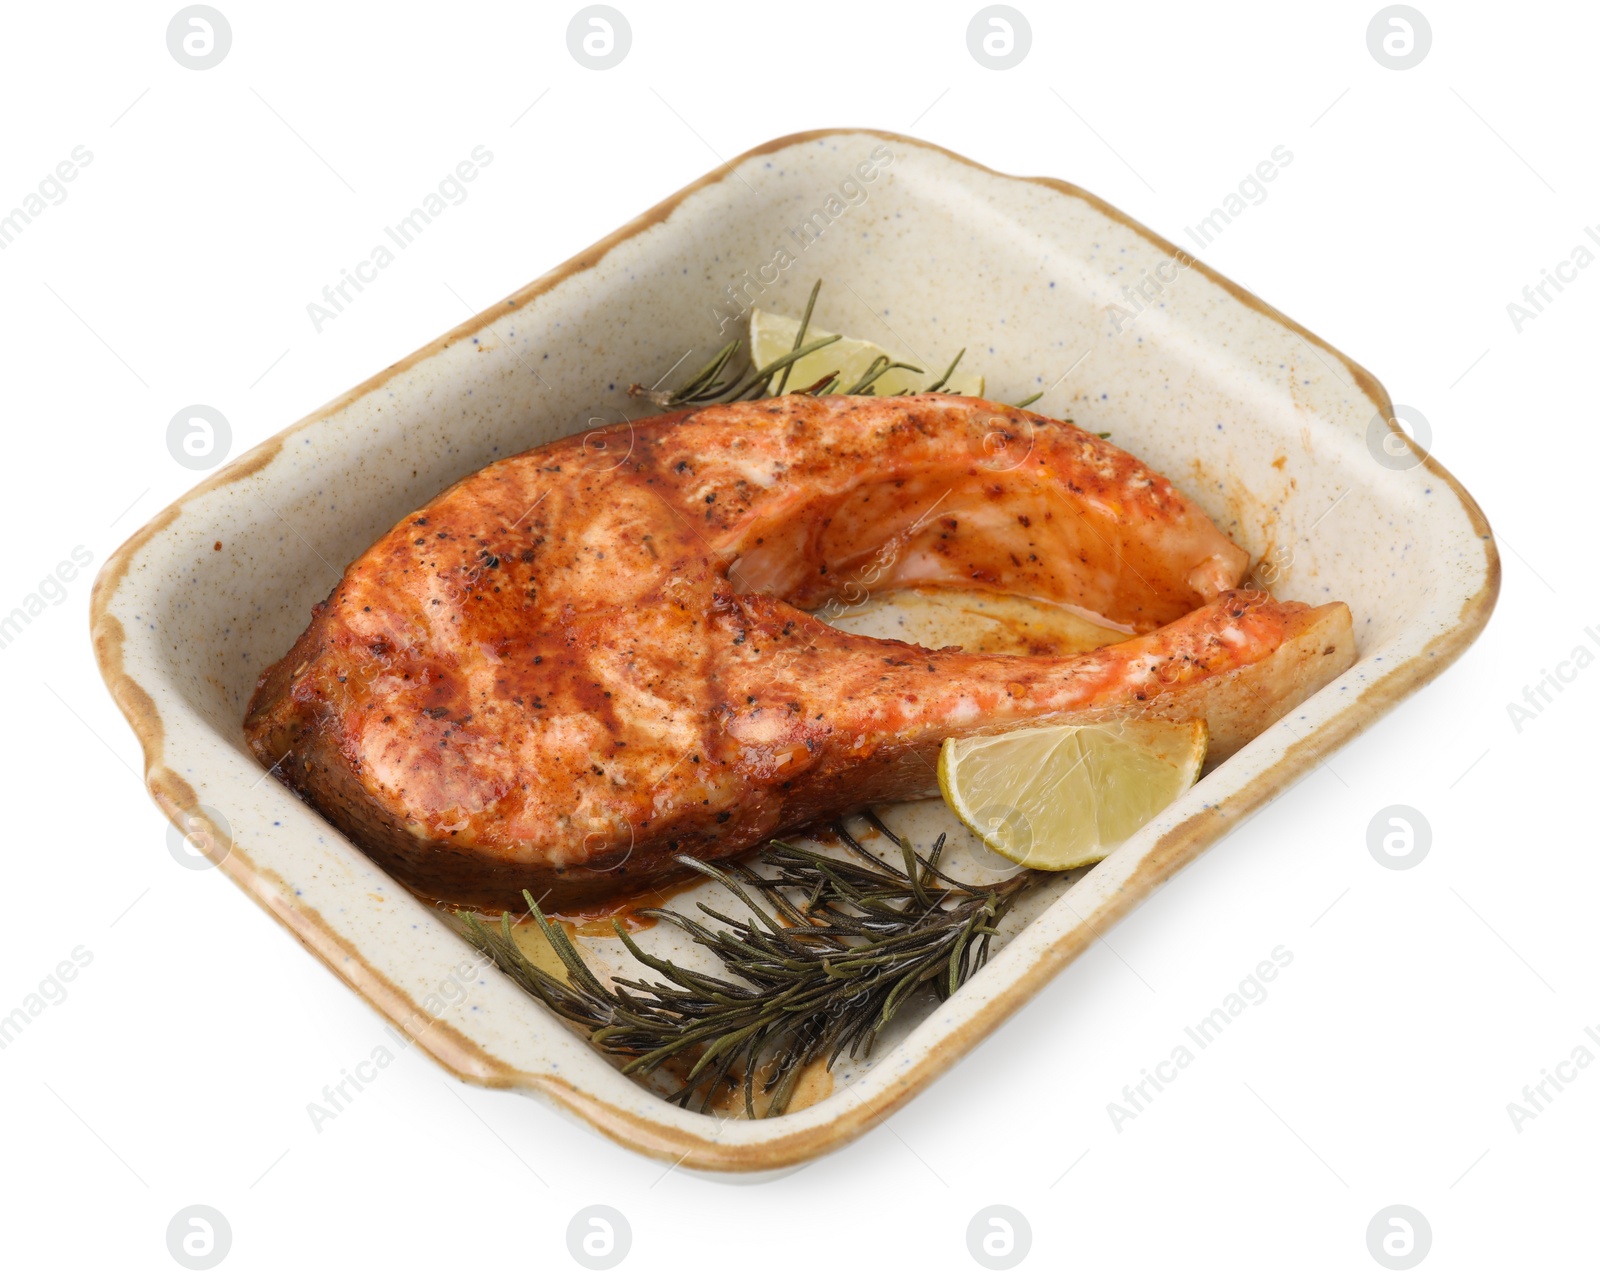 Photo of Freshly cooked fish, lime and rosemary isolated on white